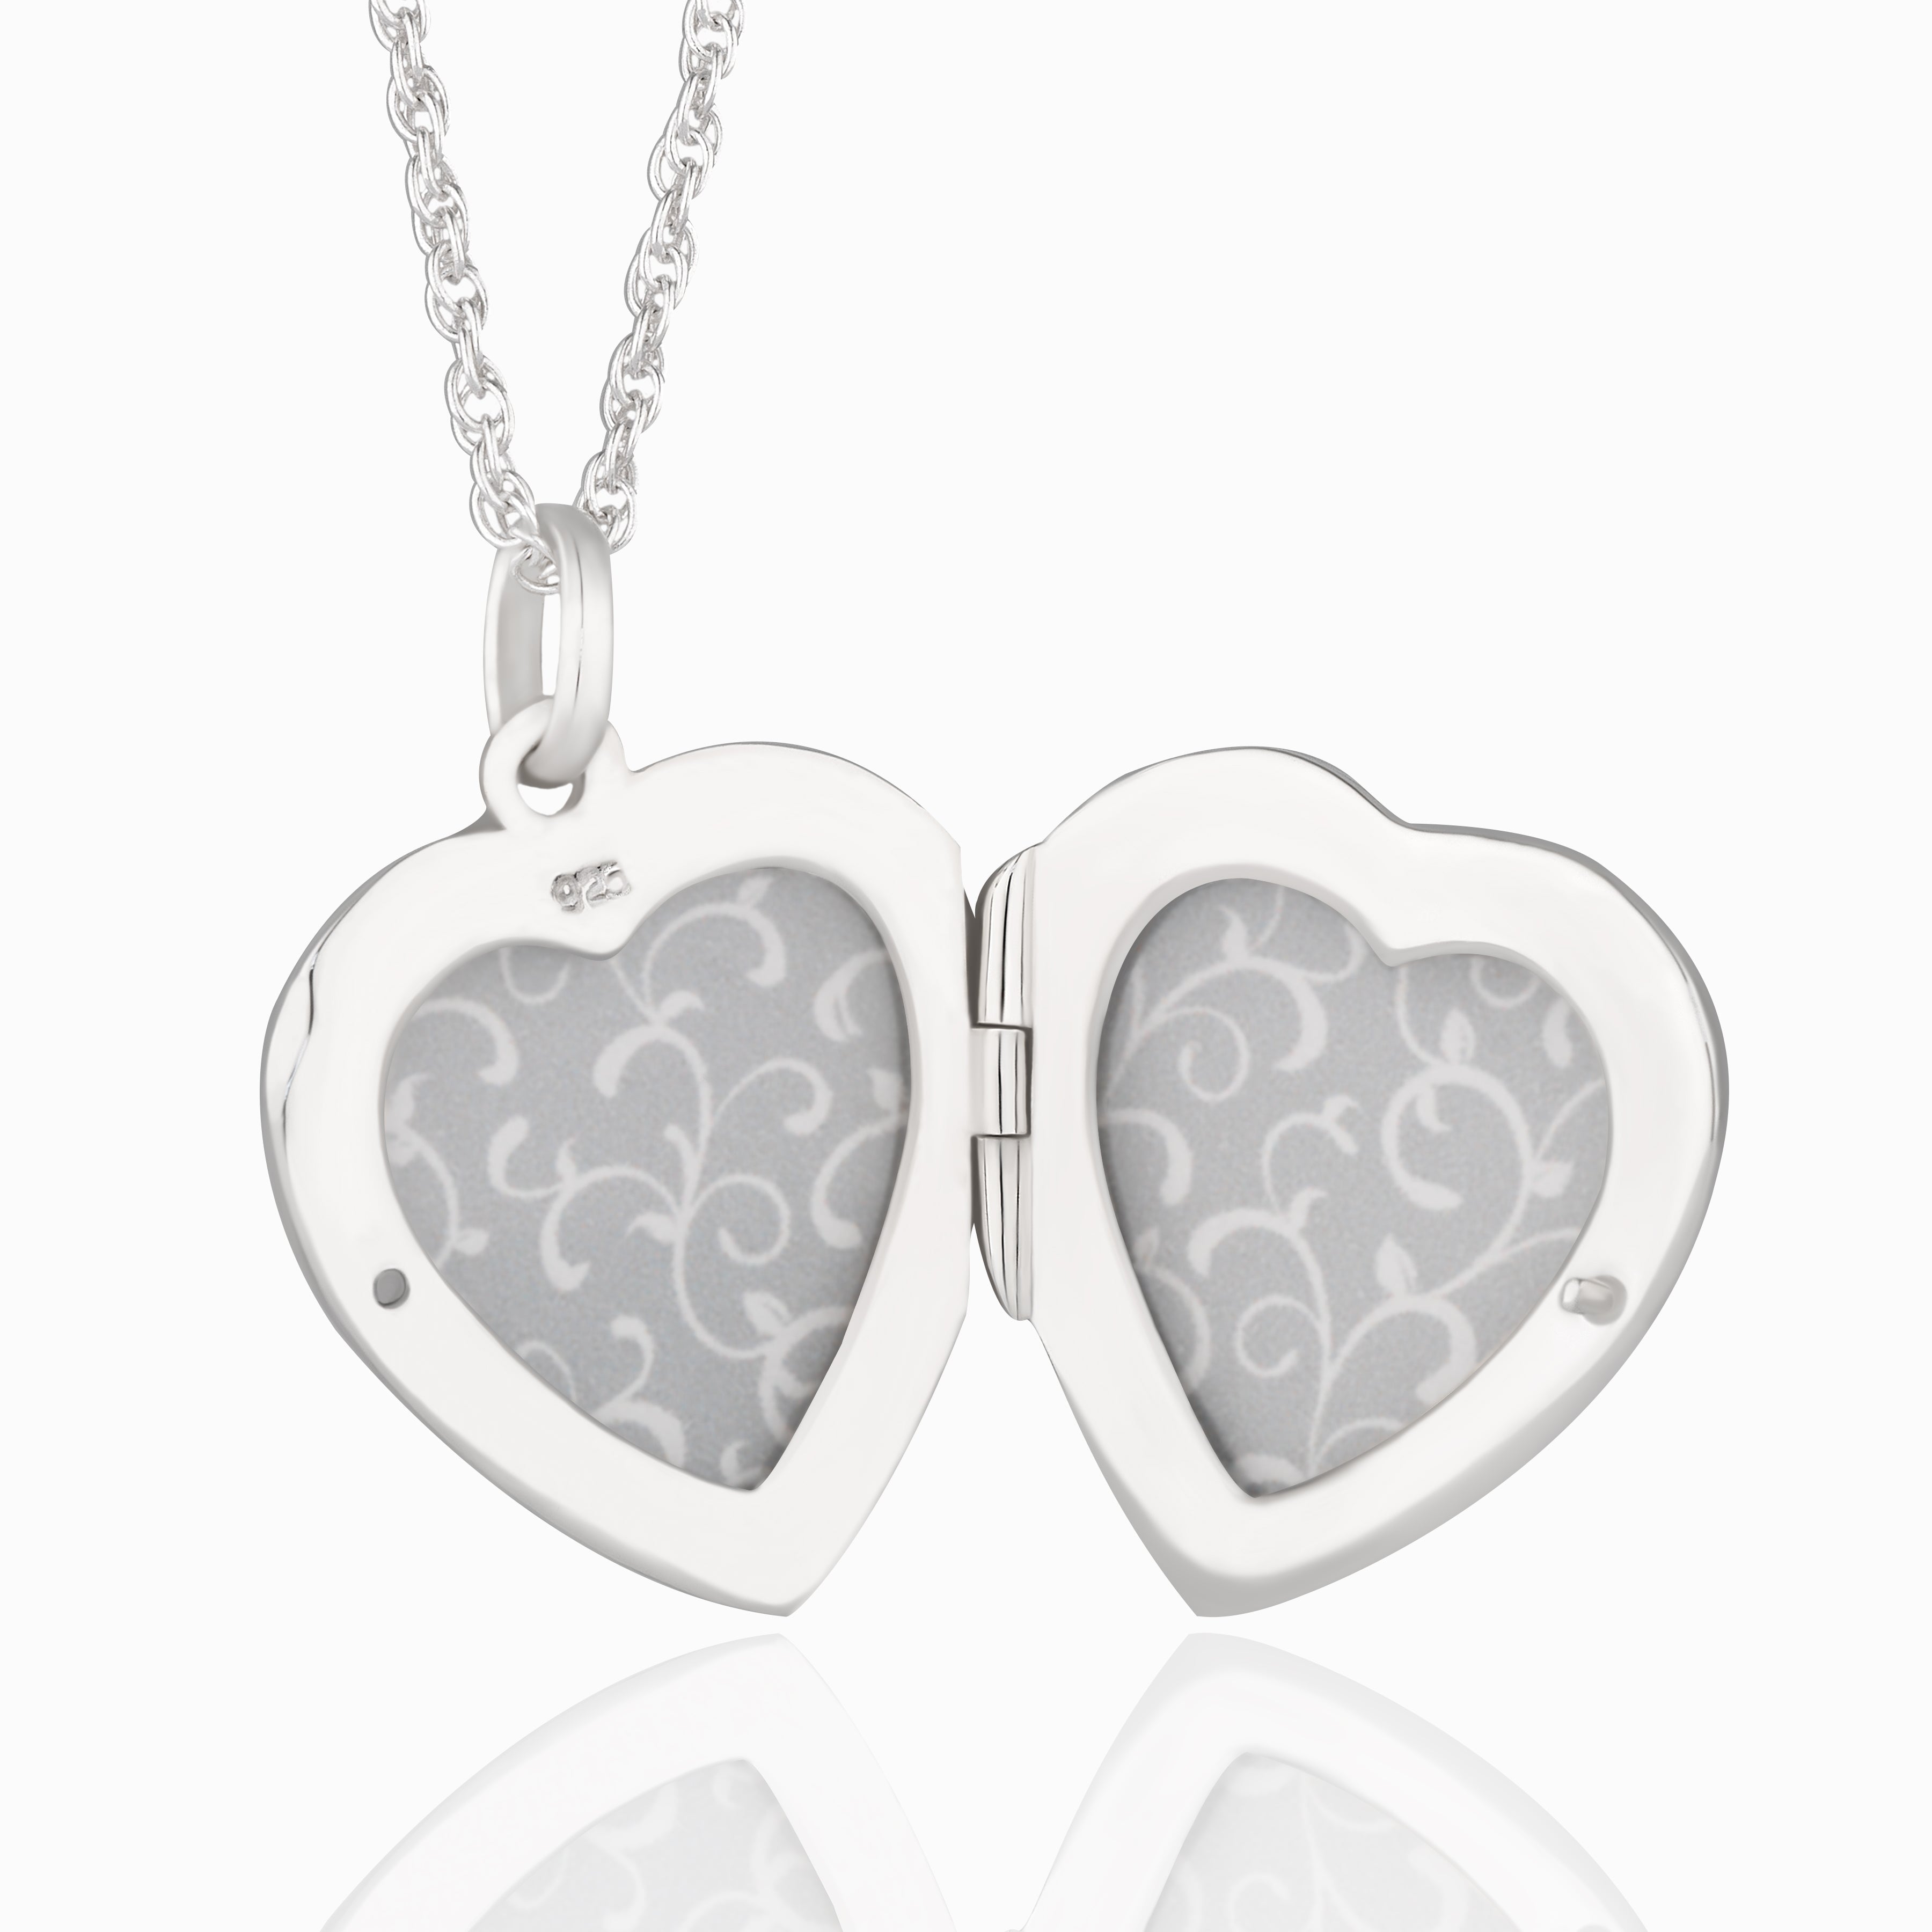 Product title: Silver Claddagh Locket, product type: Locket